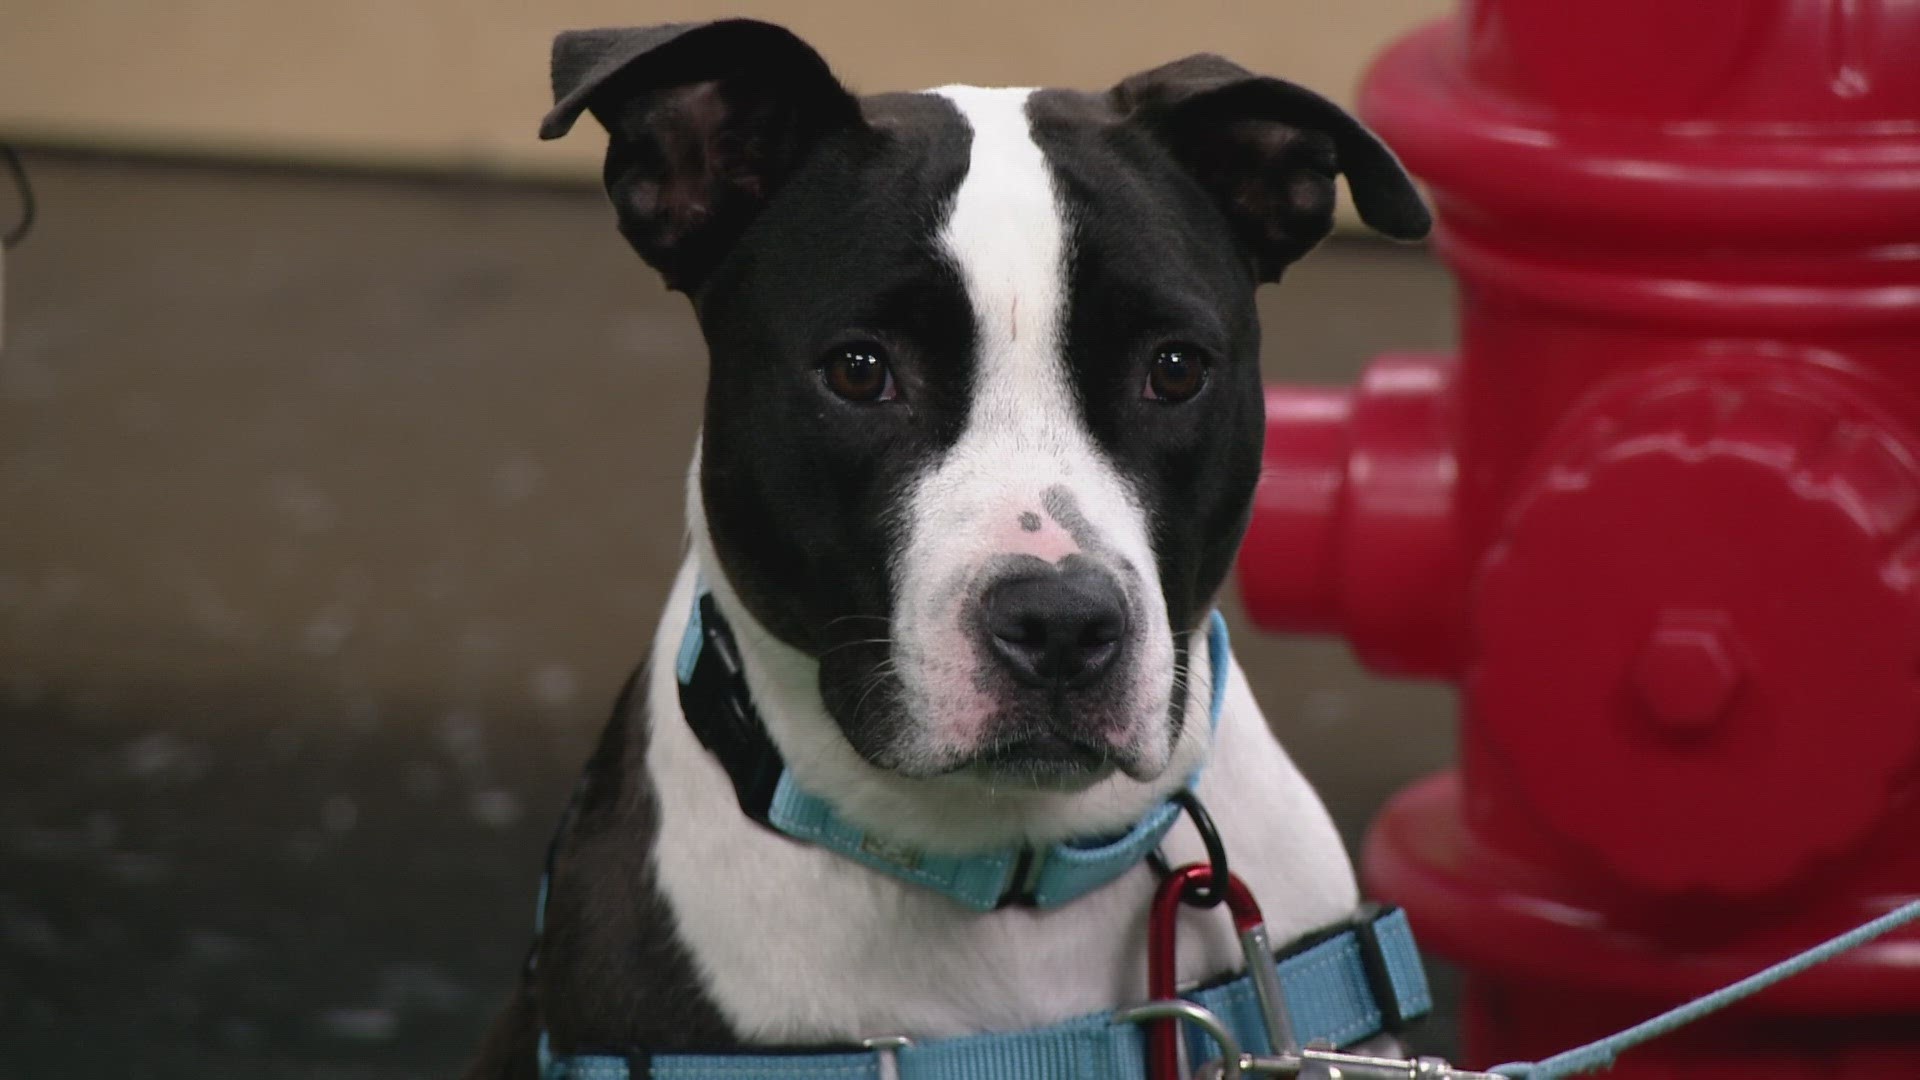 The annual campaign is taking place the whole month of August with more than 20 shelters from across Northeast Ohio partnering with 3News to help pets find a home.